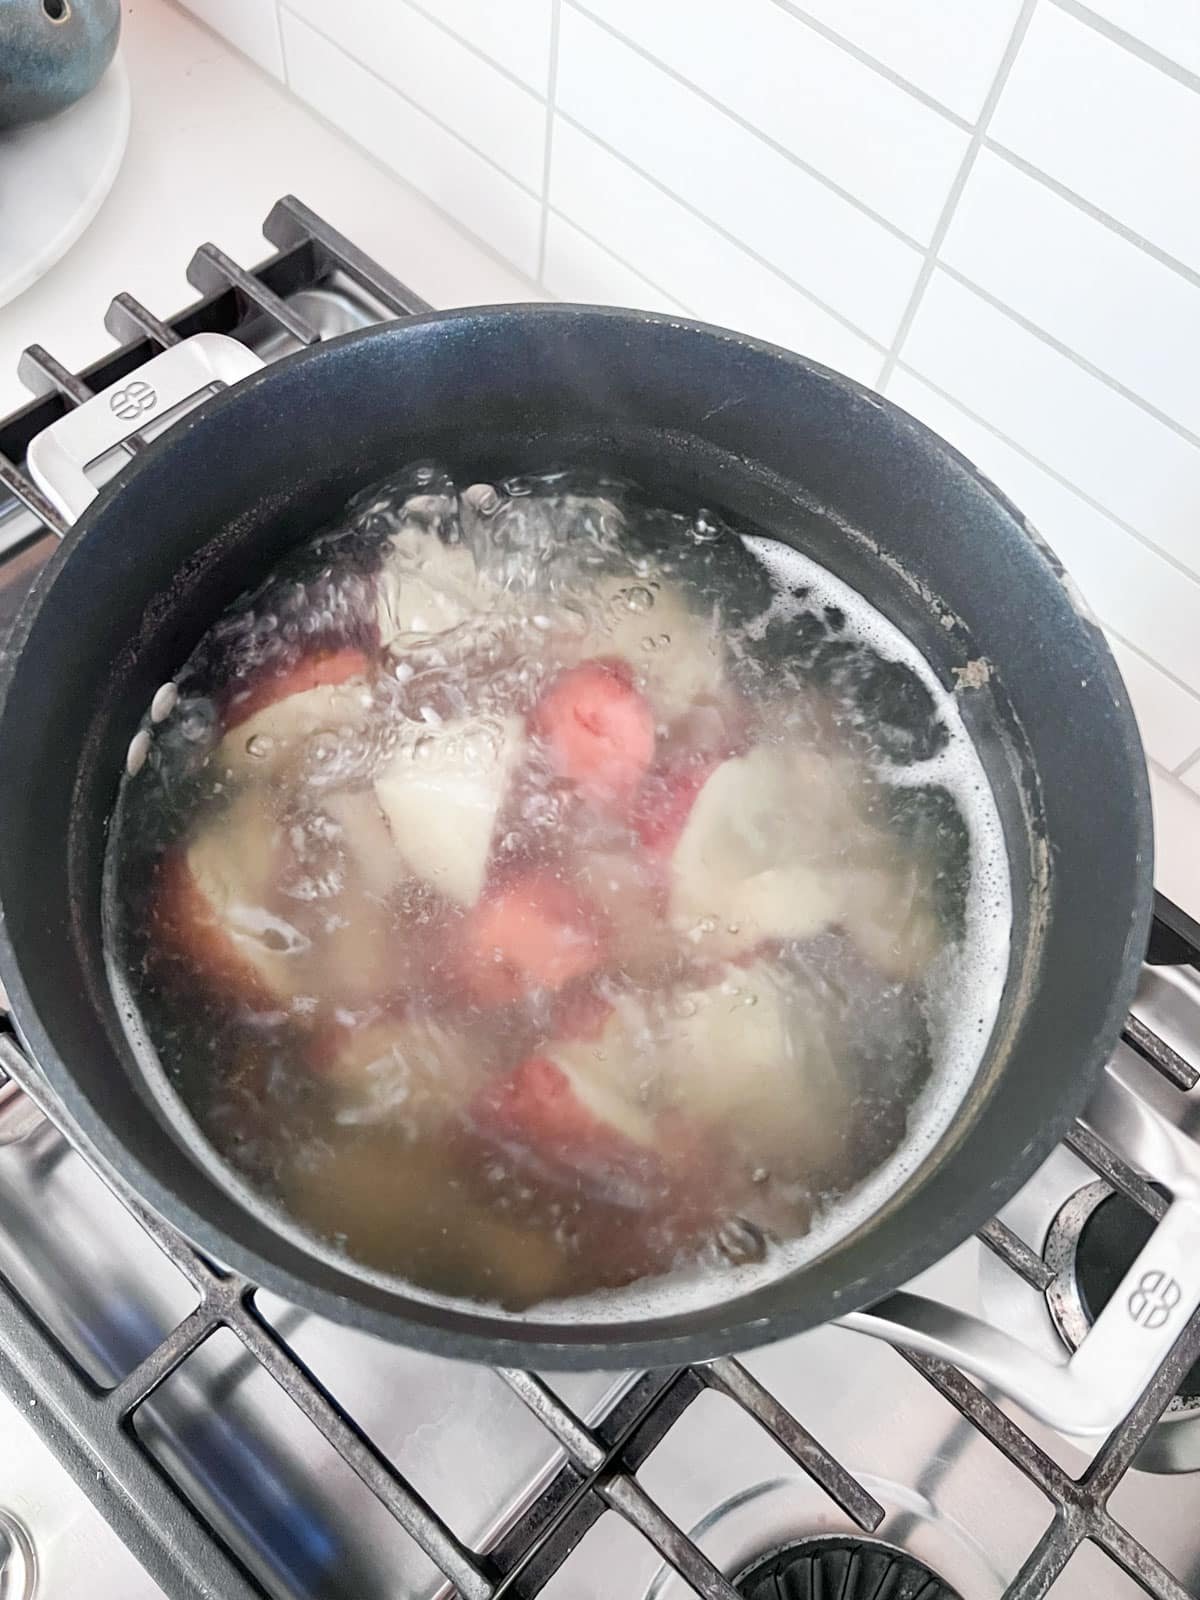 Potatoes boiling in a pot on a stove.